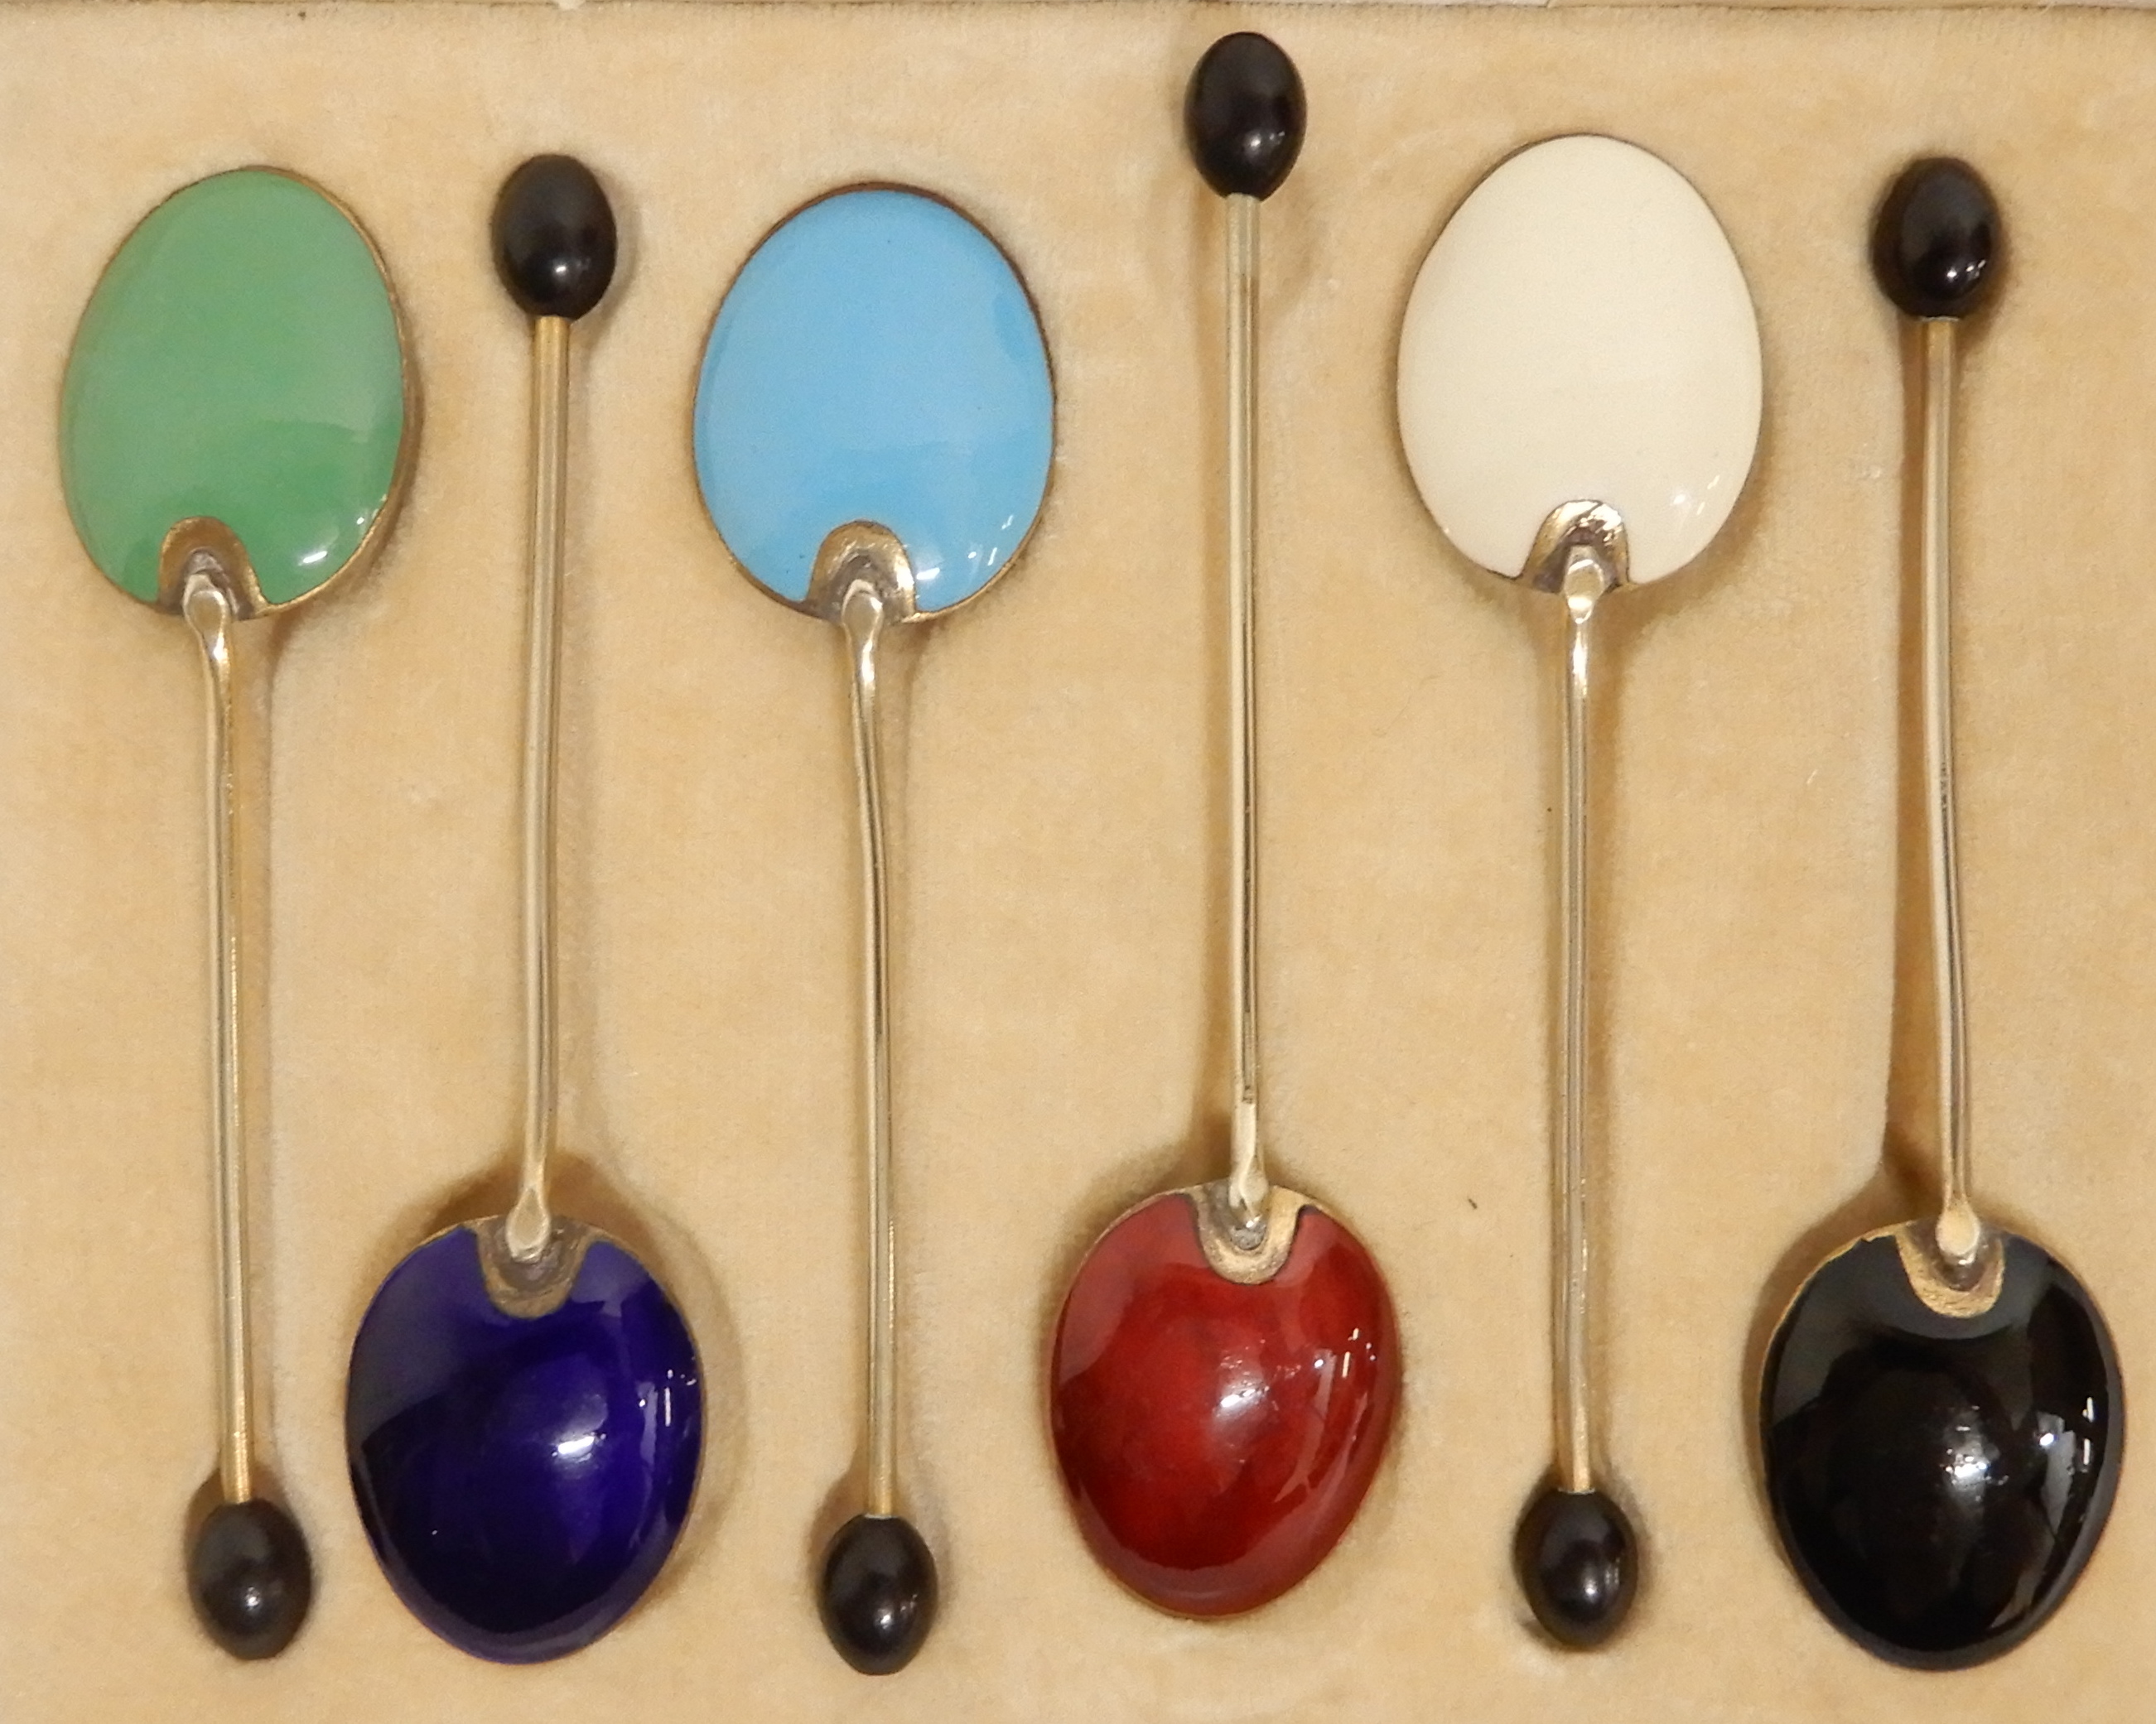 A CASED SET OF SIX SILVER AND ENAMEL COFFEE SPOONS by Turner & Simpson Limited, Birmingham 1935, the - Image 8 of 10